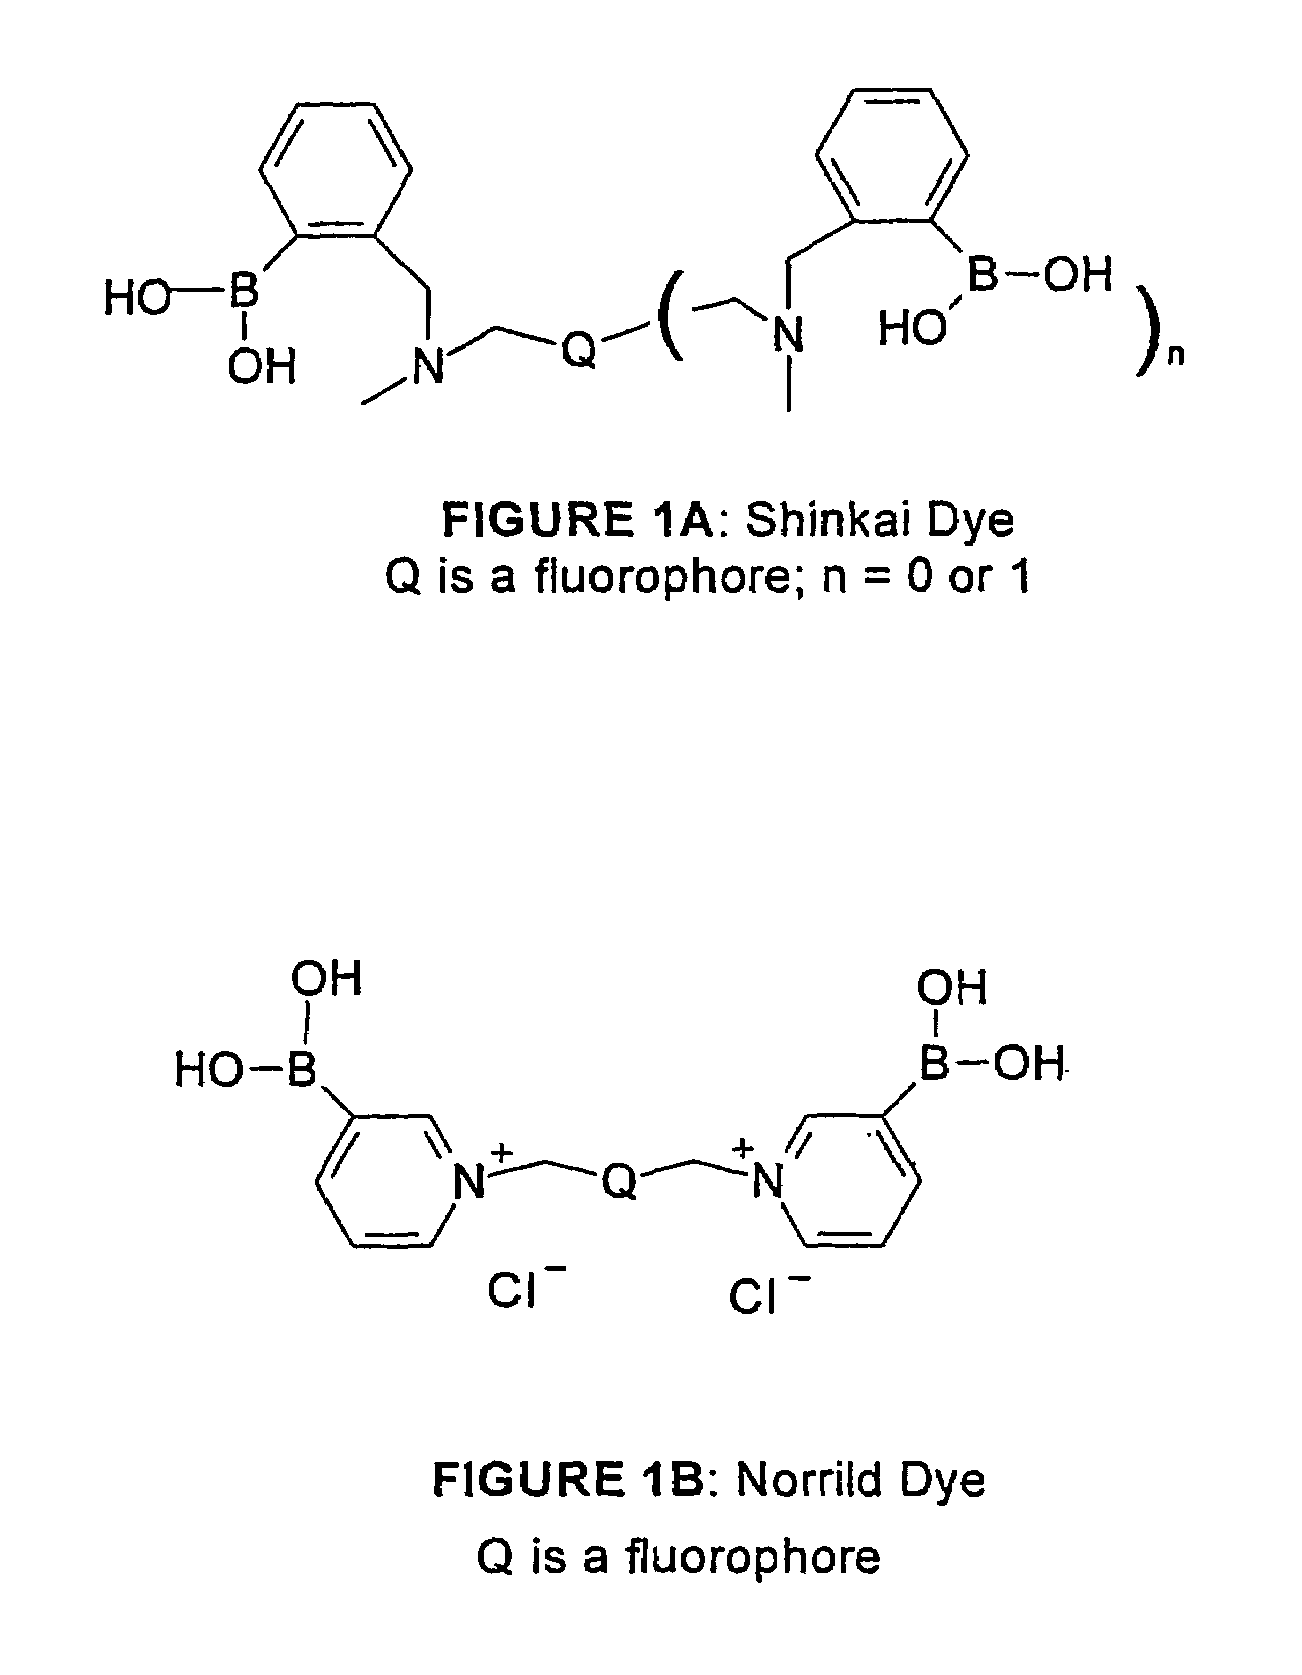 Solid-phase saccharide sensing compounds